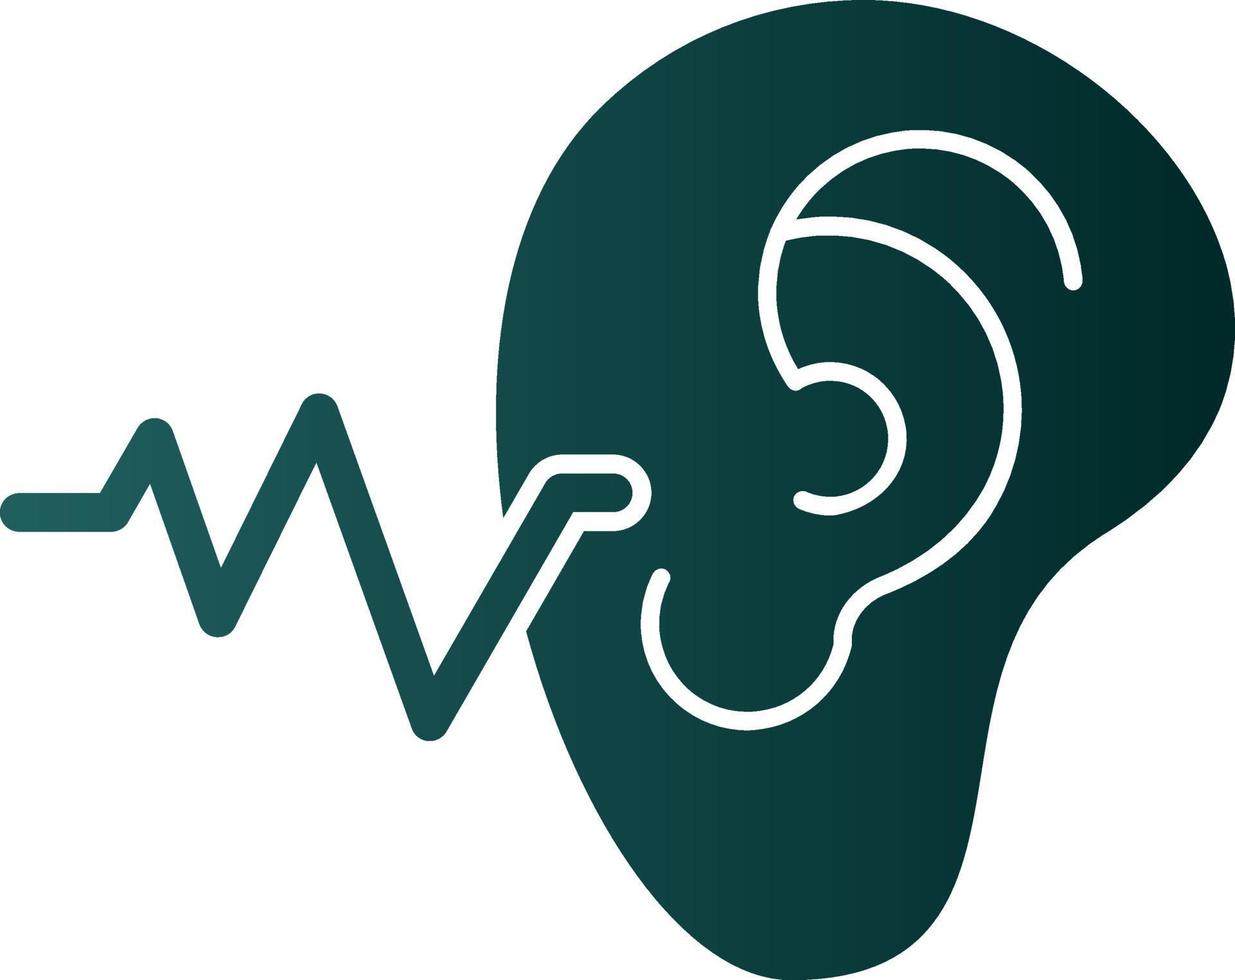 Hearning Test Vector Icon Design